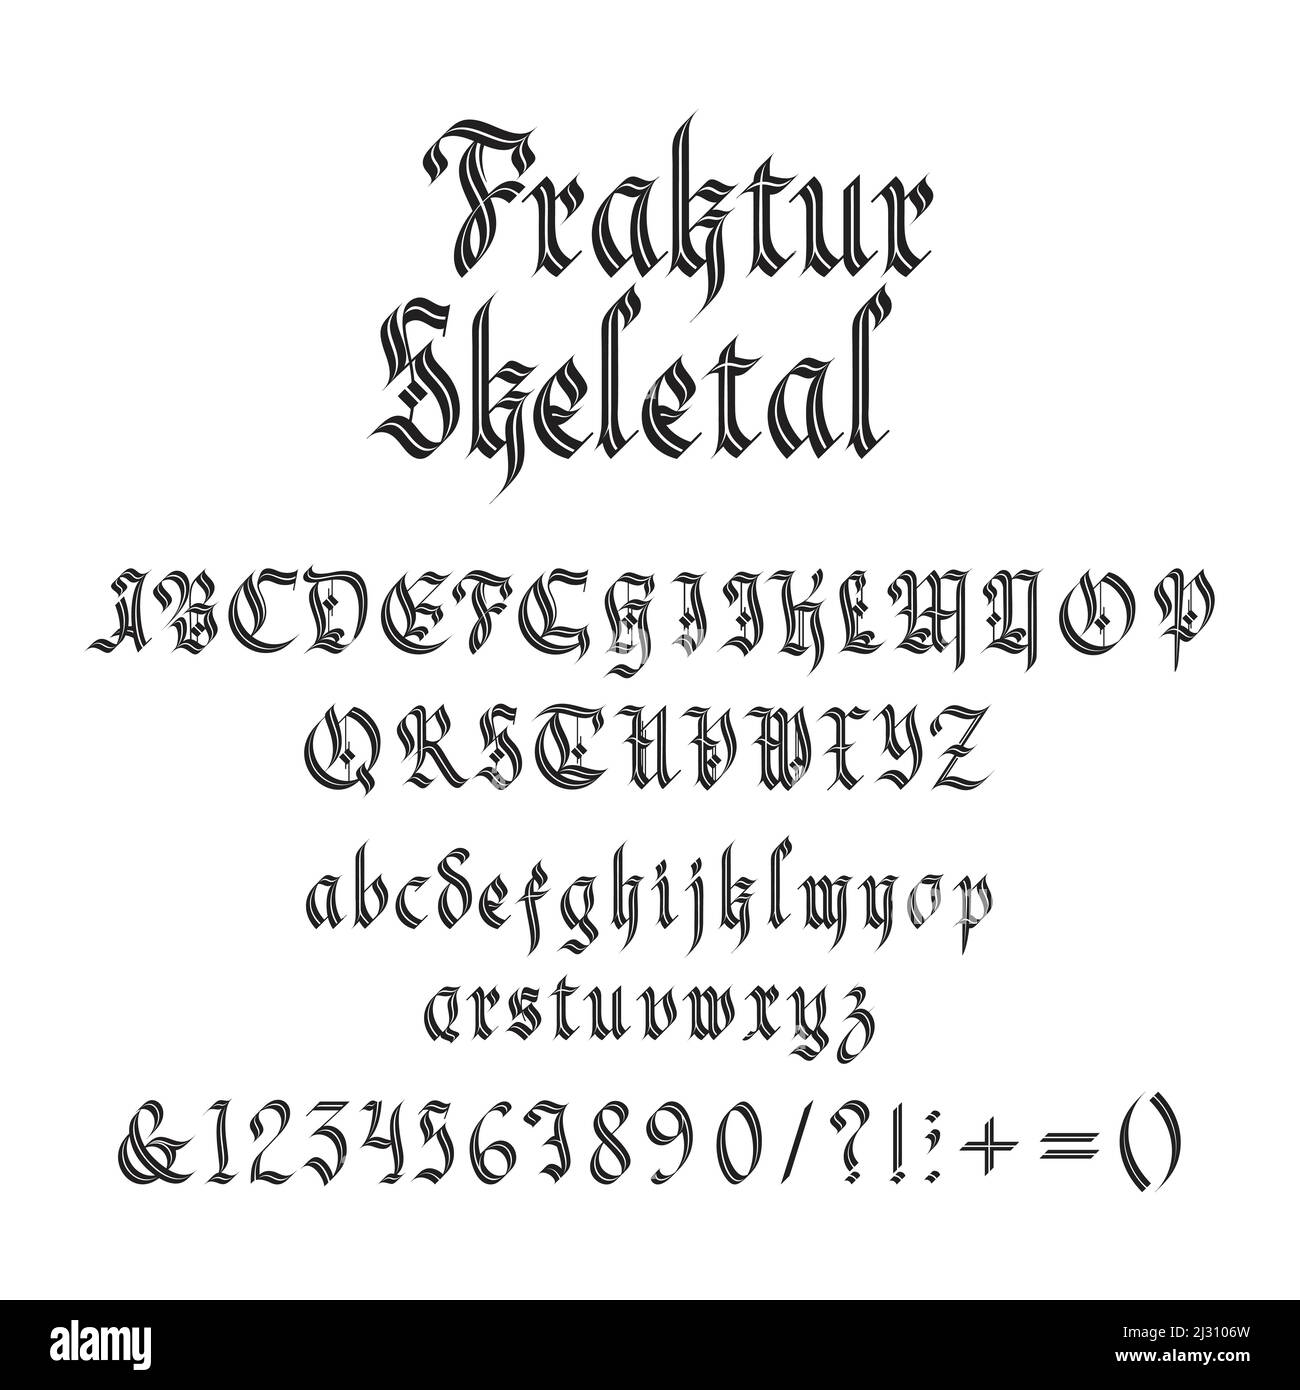 Vintage gothic font vector illustration. Set of unique decorative black capitals and lowercase calligraphic alphabet letters, numbers, symbols and sig Stock Vector